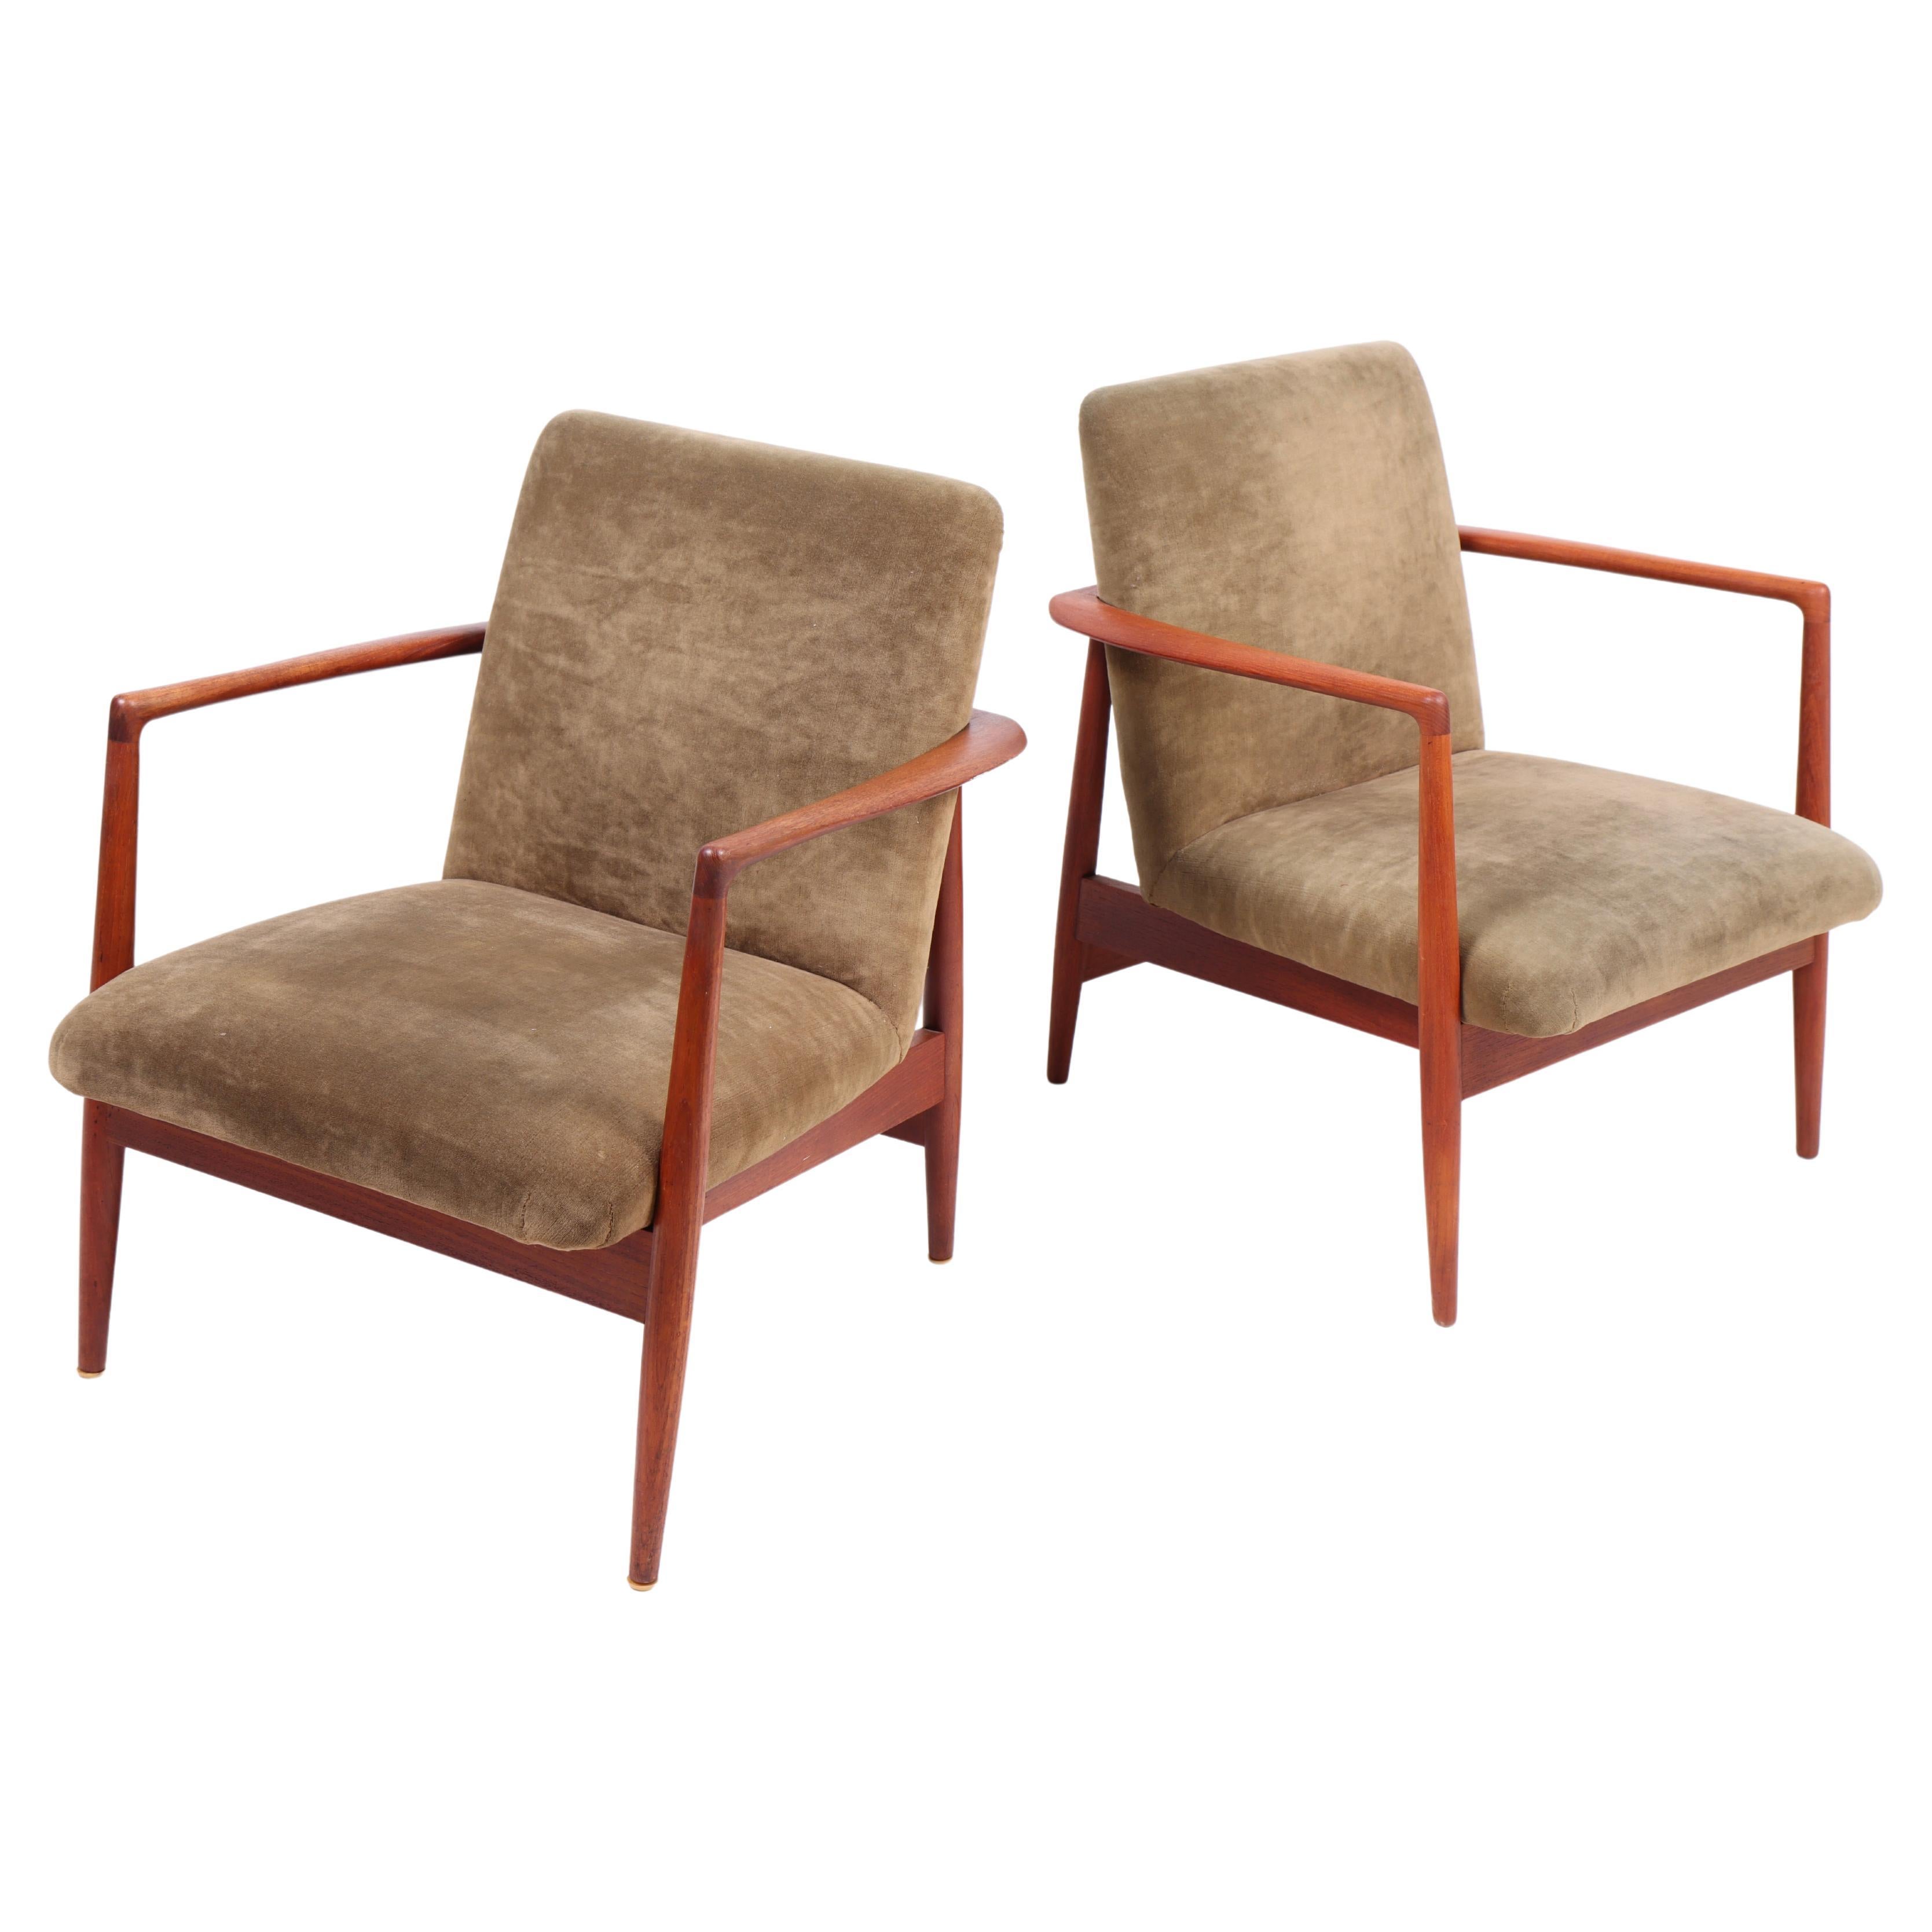 Pair of Midcentury Lounge Chairs in Teak and Velvet by C.B Hansen, 1950s For Sale